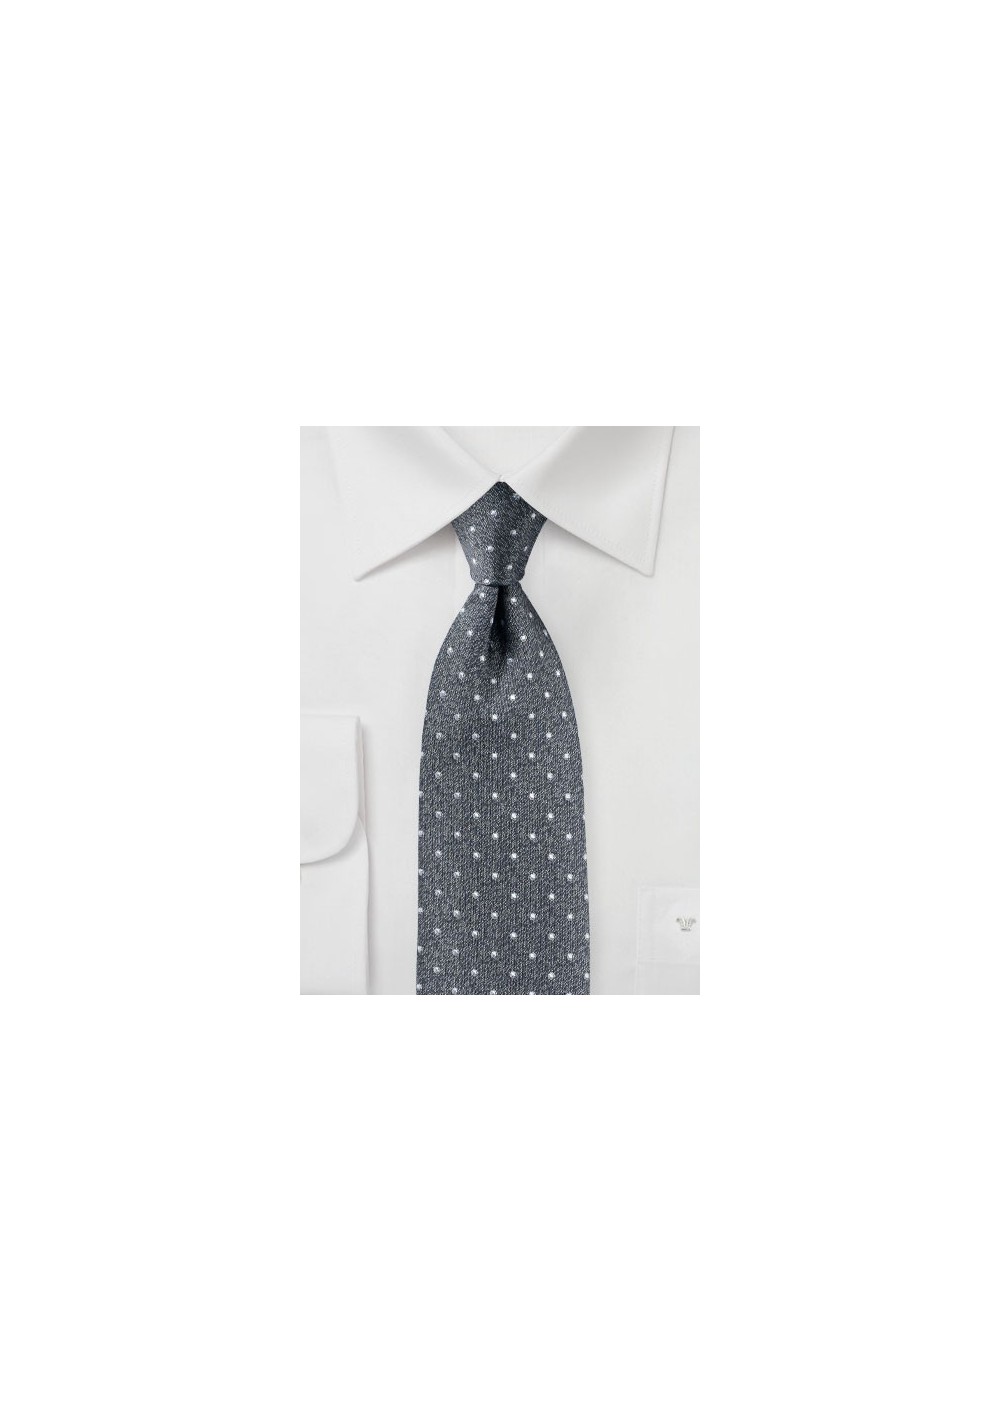 Textured Polka Dot Tie in Classic Gray